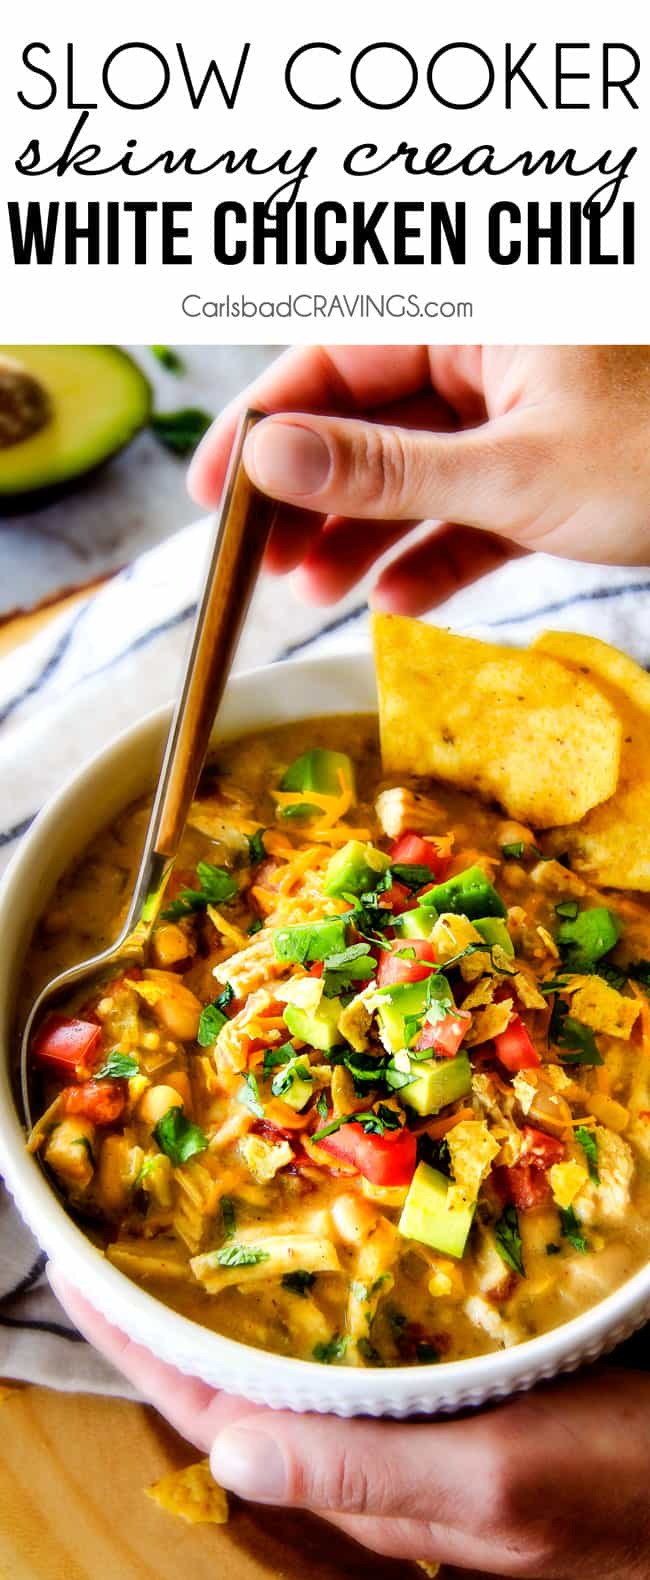 This is the best Slow Cooker Creamy White Chicken Chili I have ever had! Its soooo creamy without heavy cream, so easy, and the layers of flavors are out of this world!